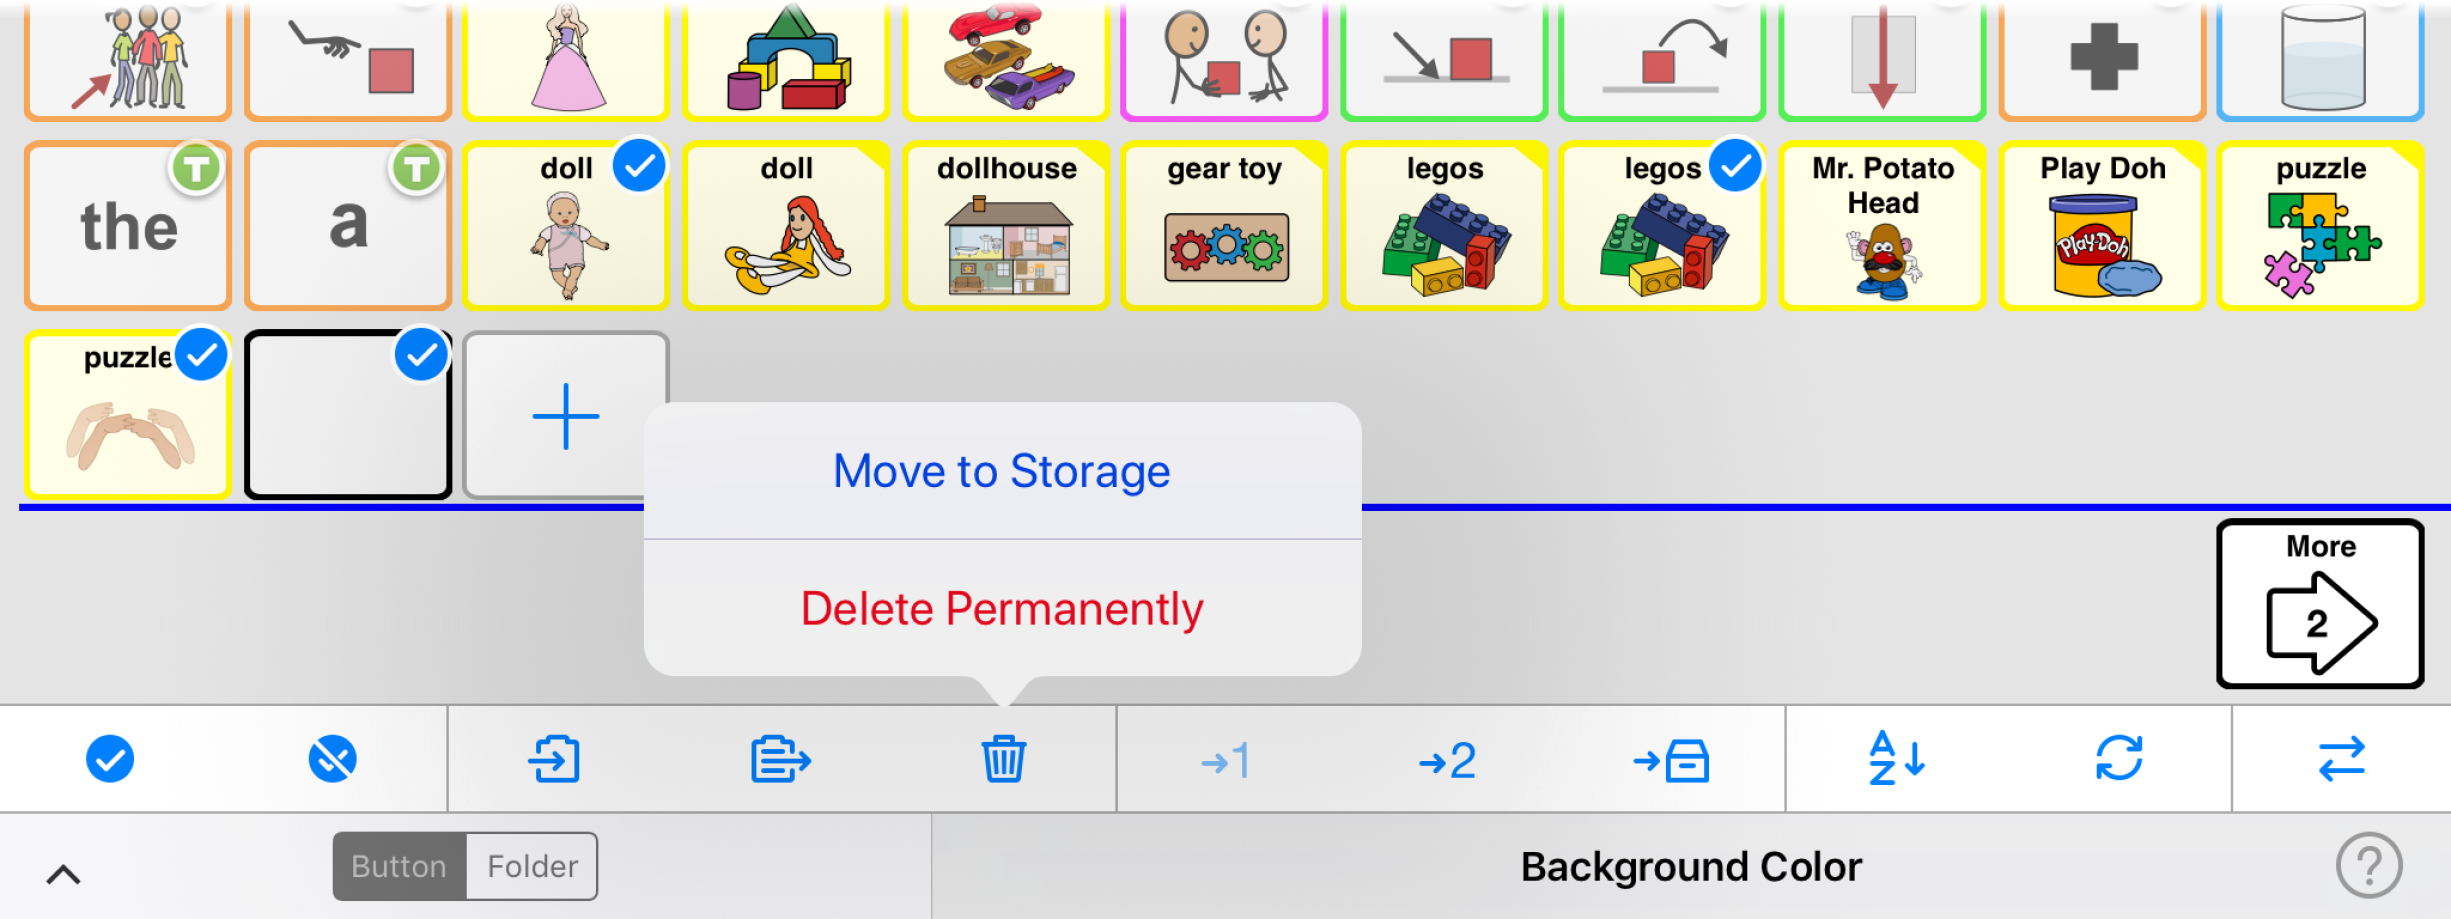 Move to Storage or Delete permanently choice